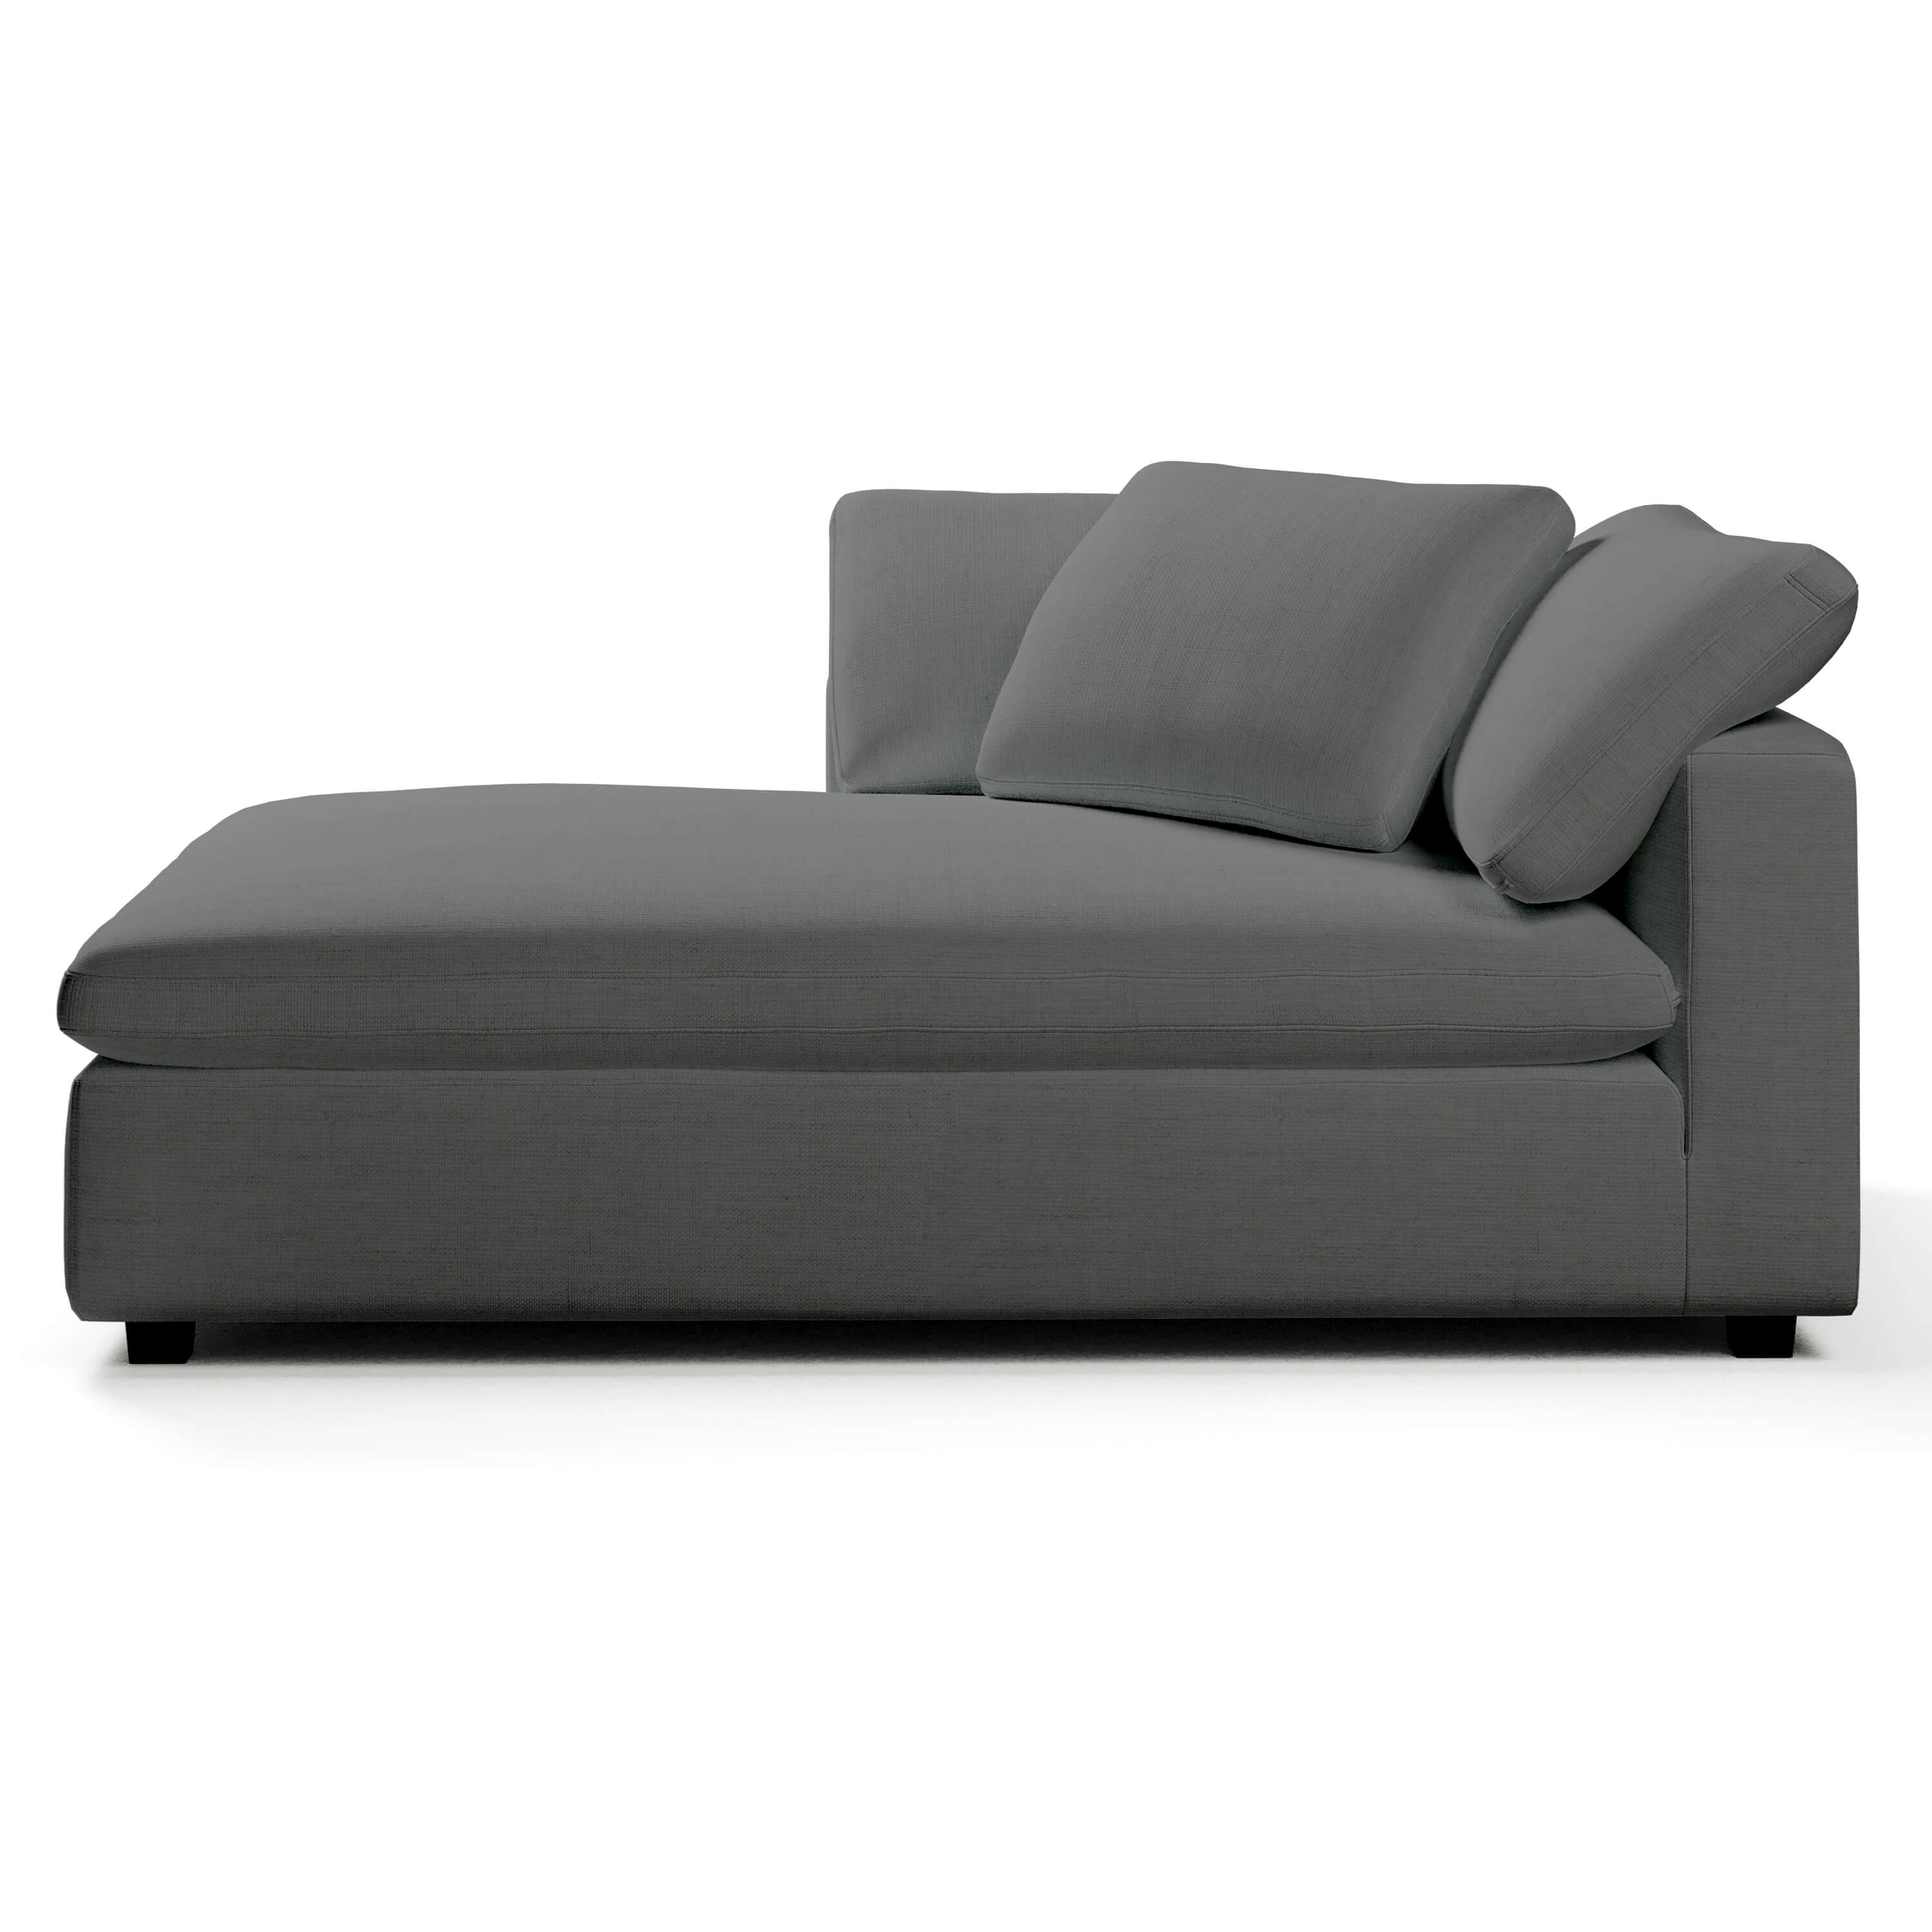 Left Arm Chaise Lounge | White Chaise Lounge Left | Couch Haus